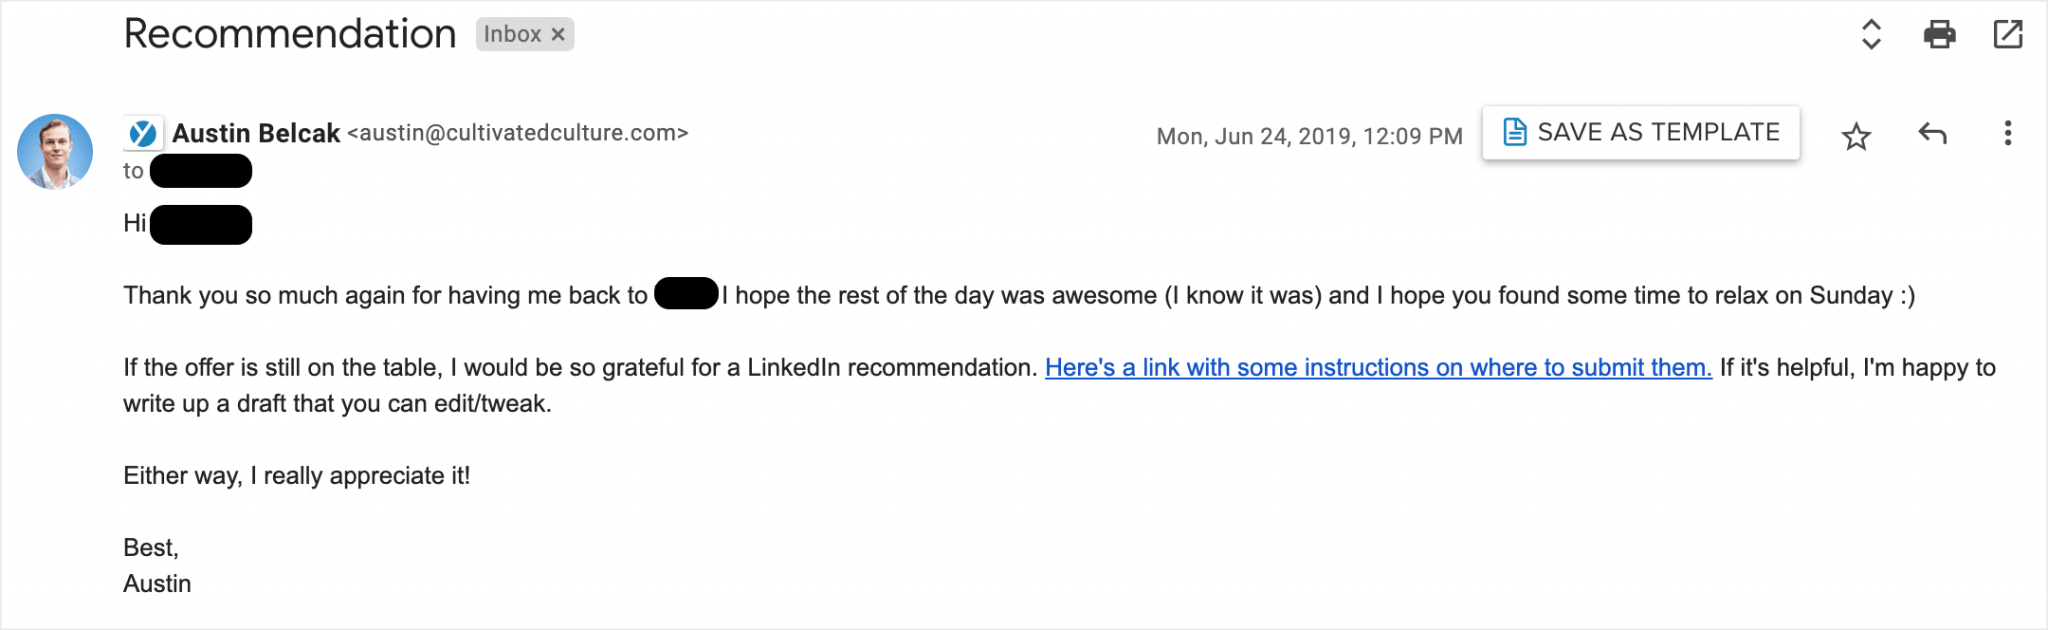 linkedin recommendation examples for classmates